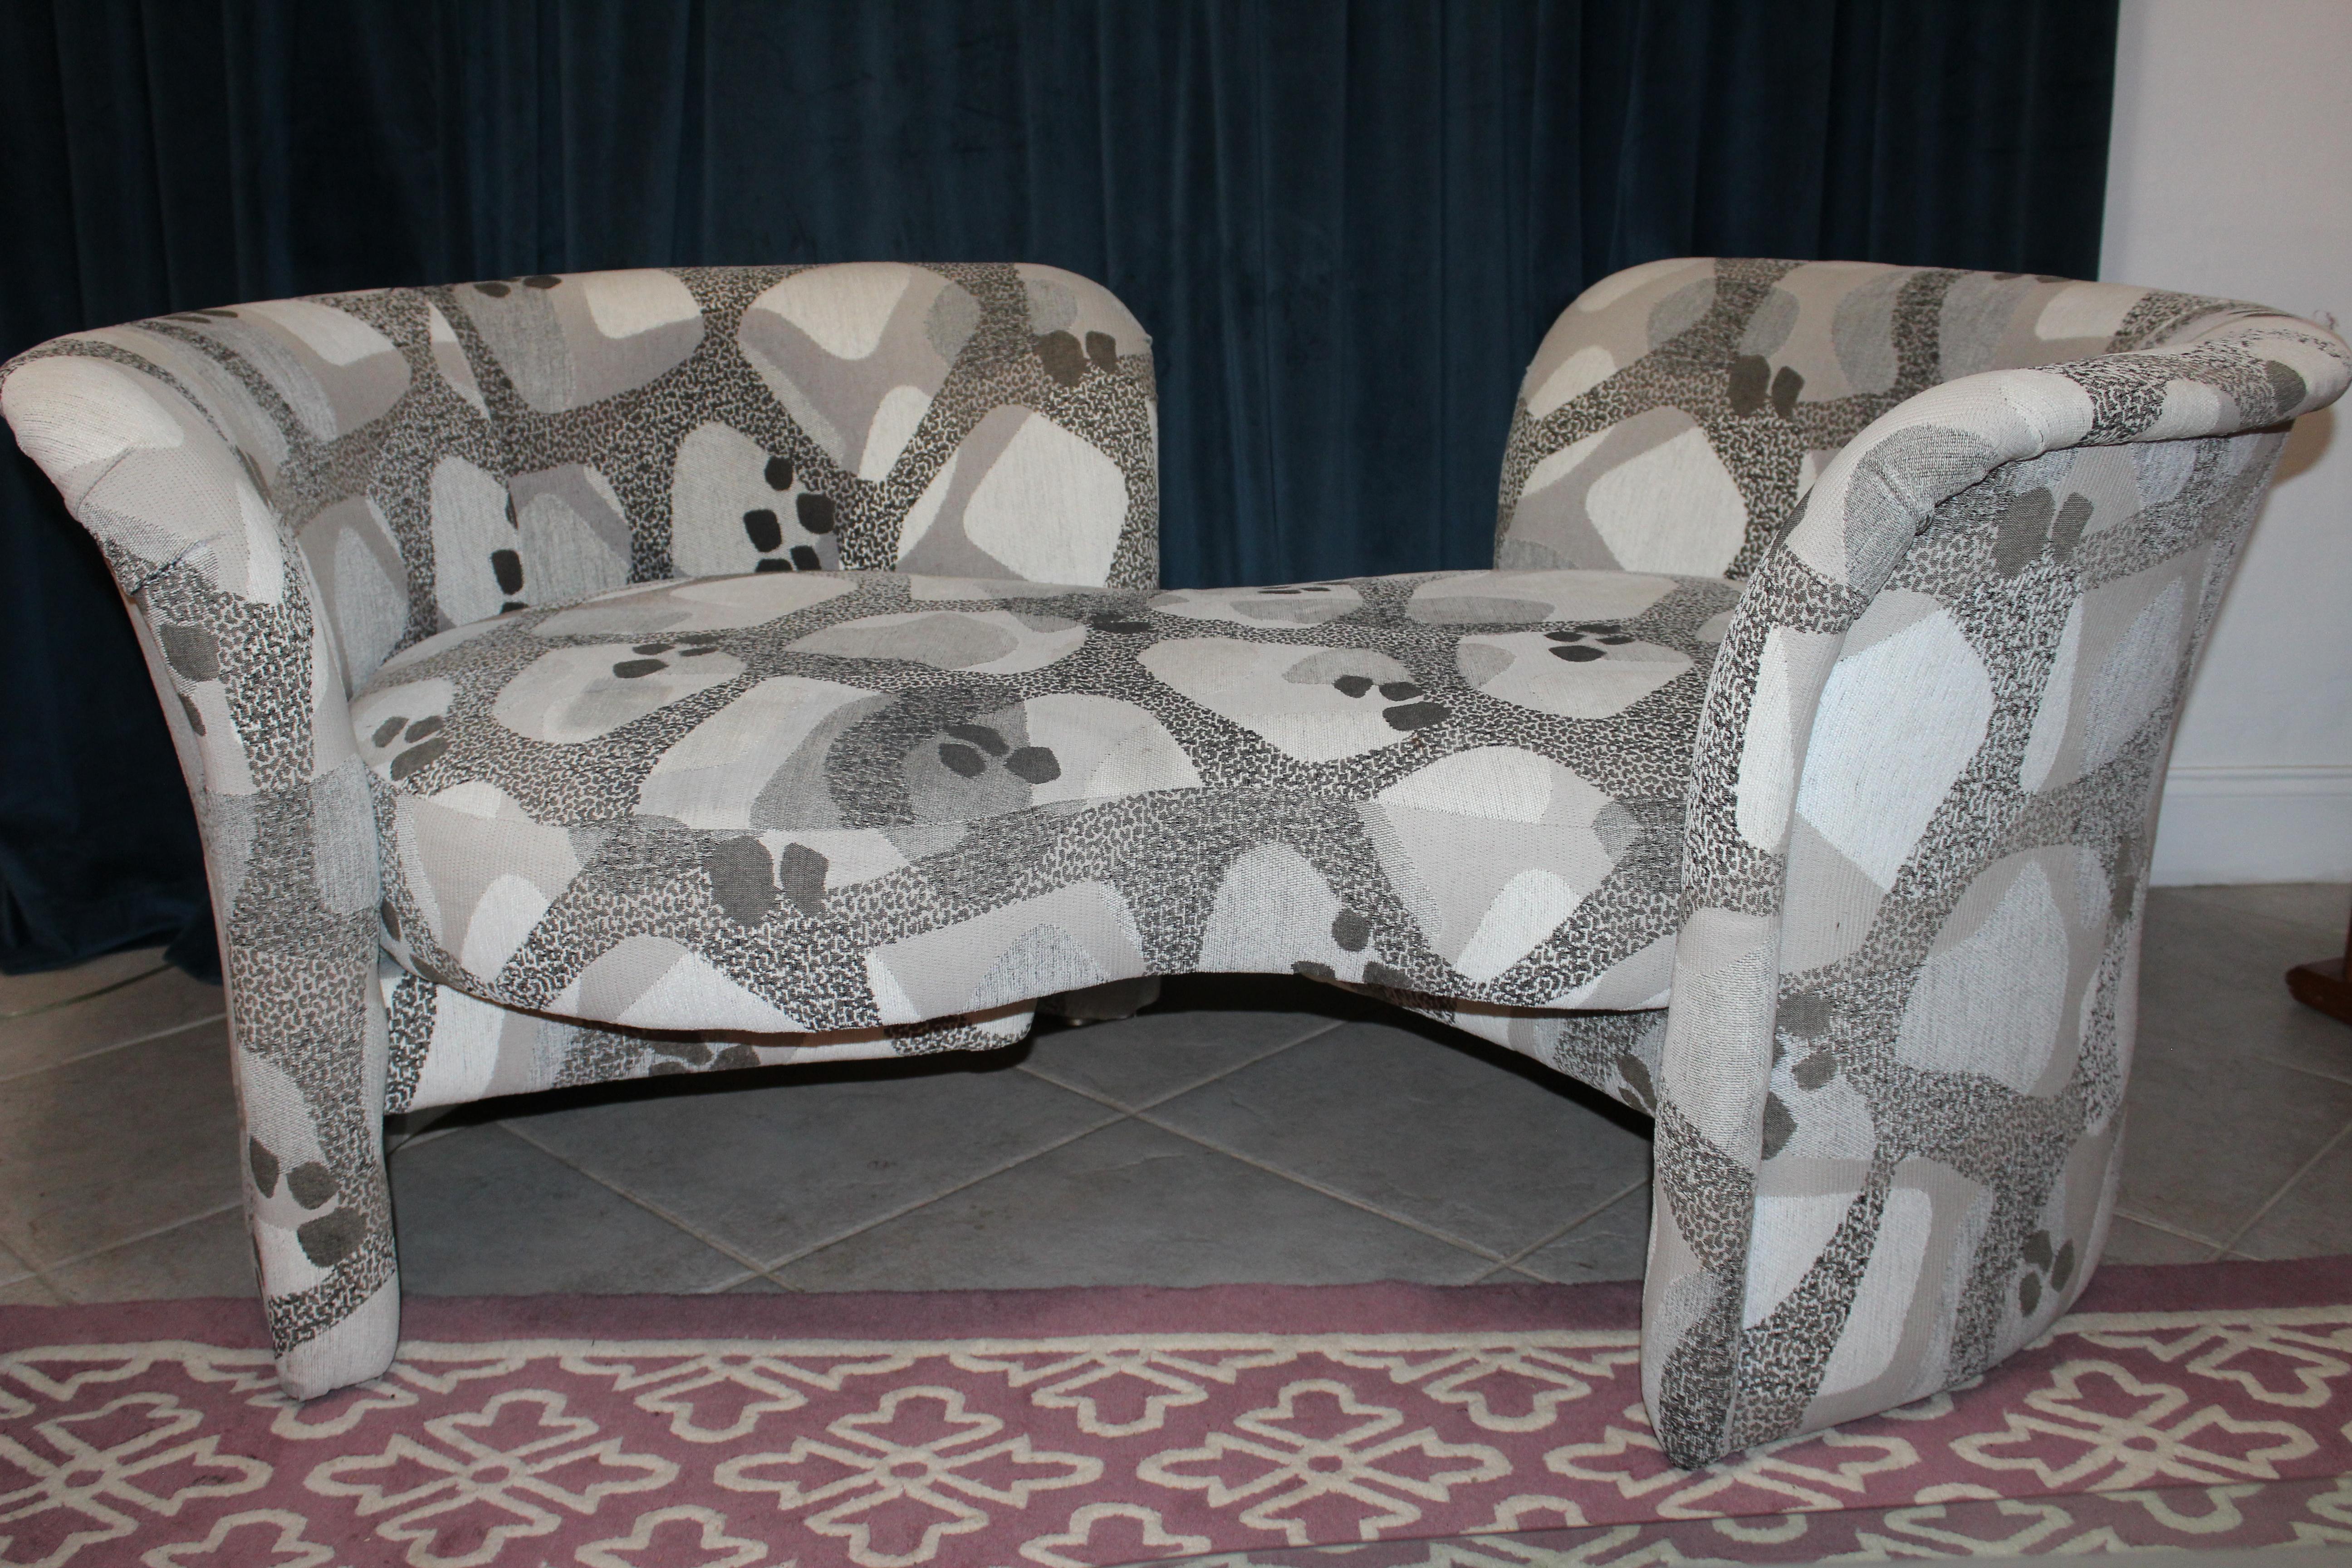 One of a kind sculptural design love seat Thayer Coggin by Milo Baughman . Original gray and white upholstery in excellent vintage condition. Can be refigured in multiple ways. Matching pillows included. Upholstered on all sides. This settee